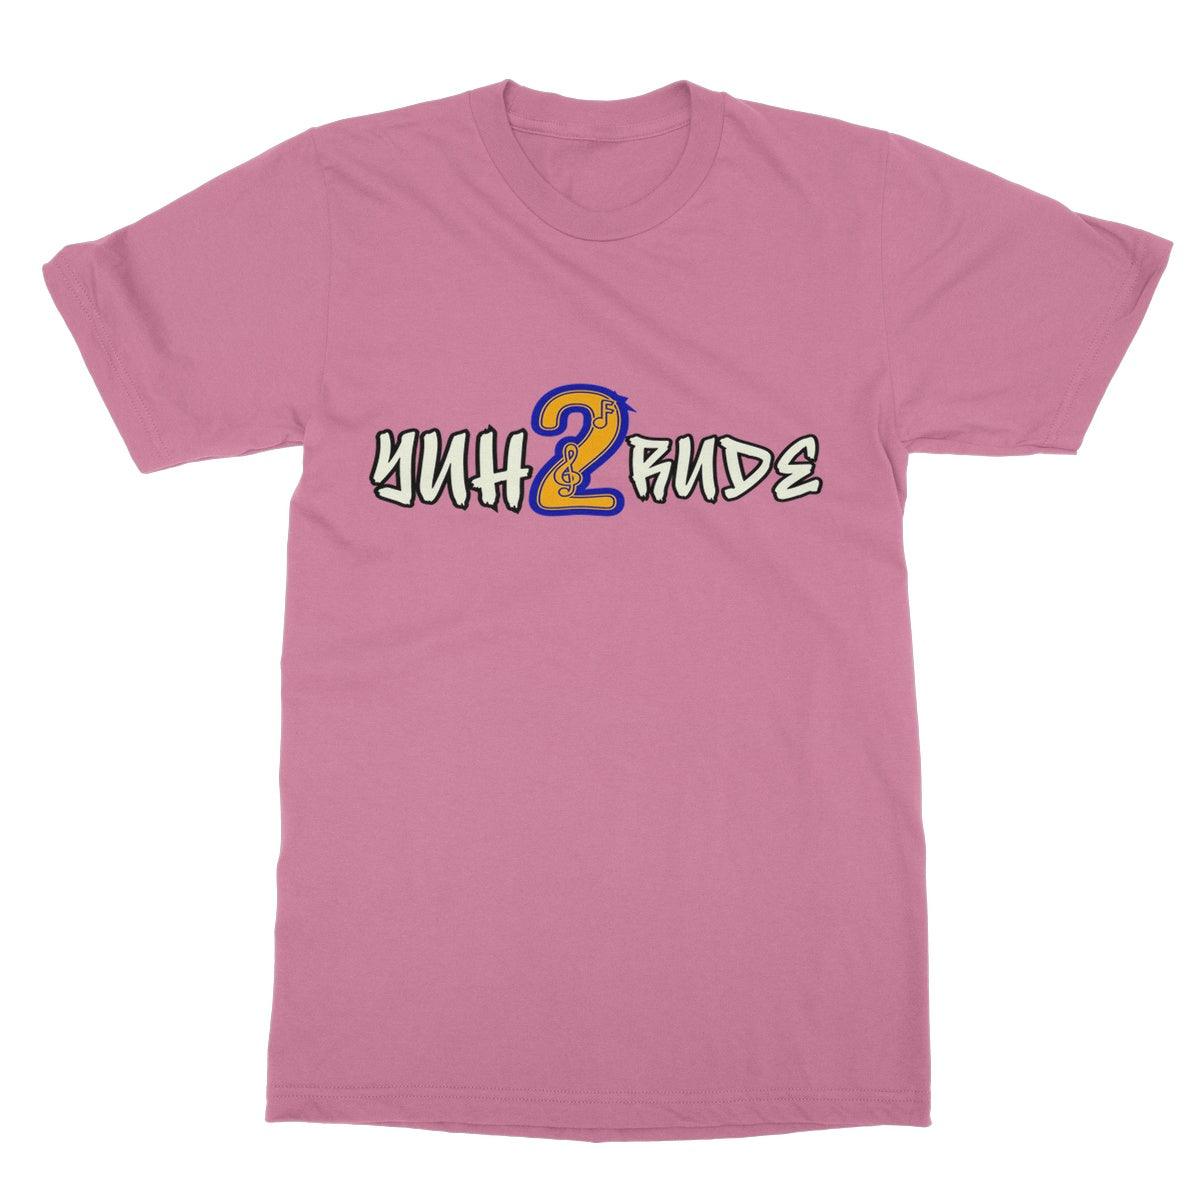 Yuh 2 Rude Softstyle T-Shirt - D'Sare 